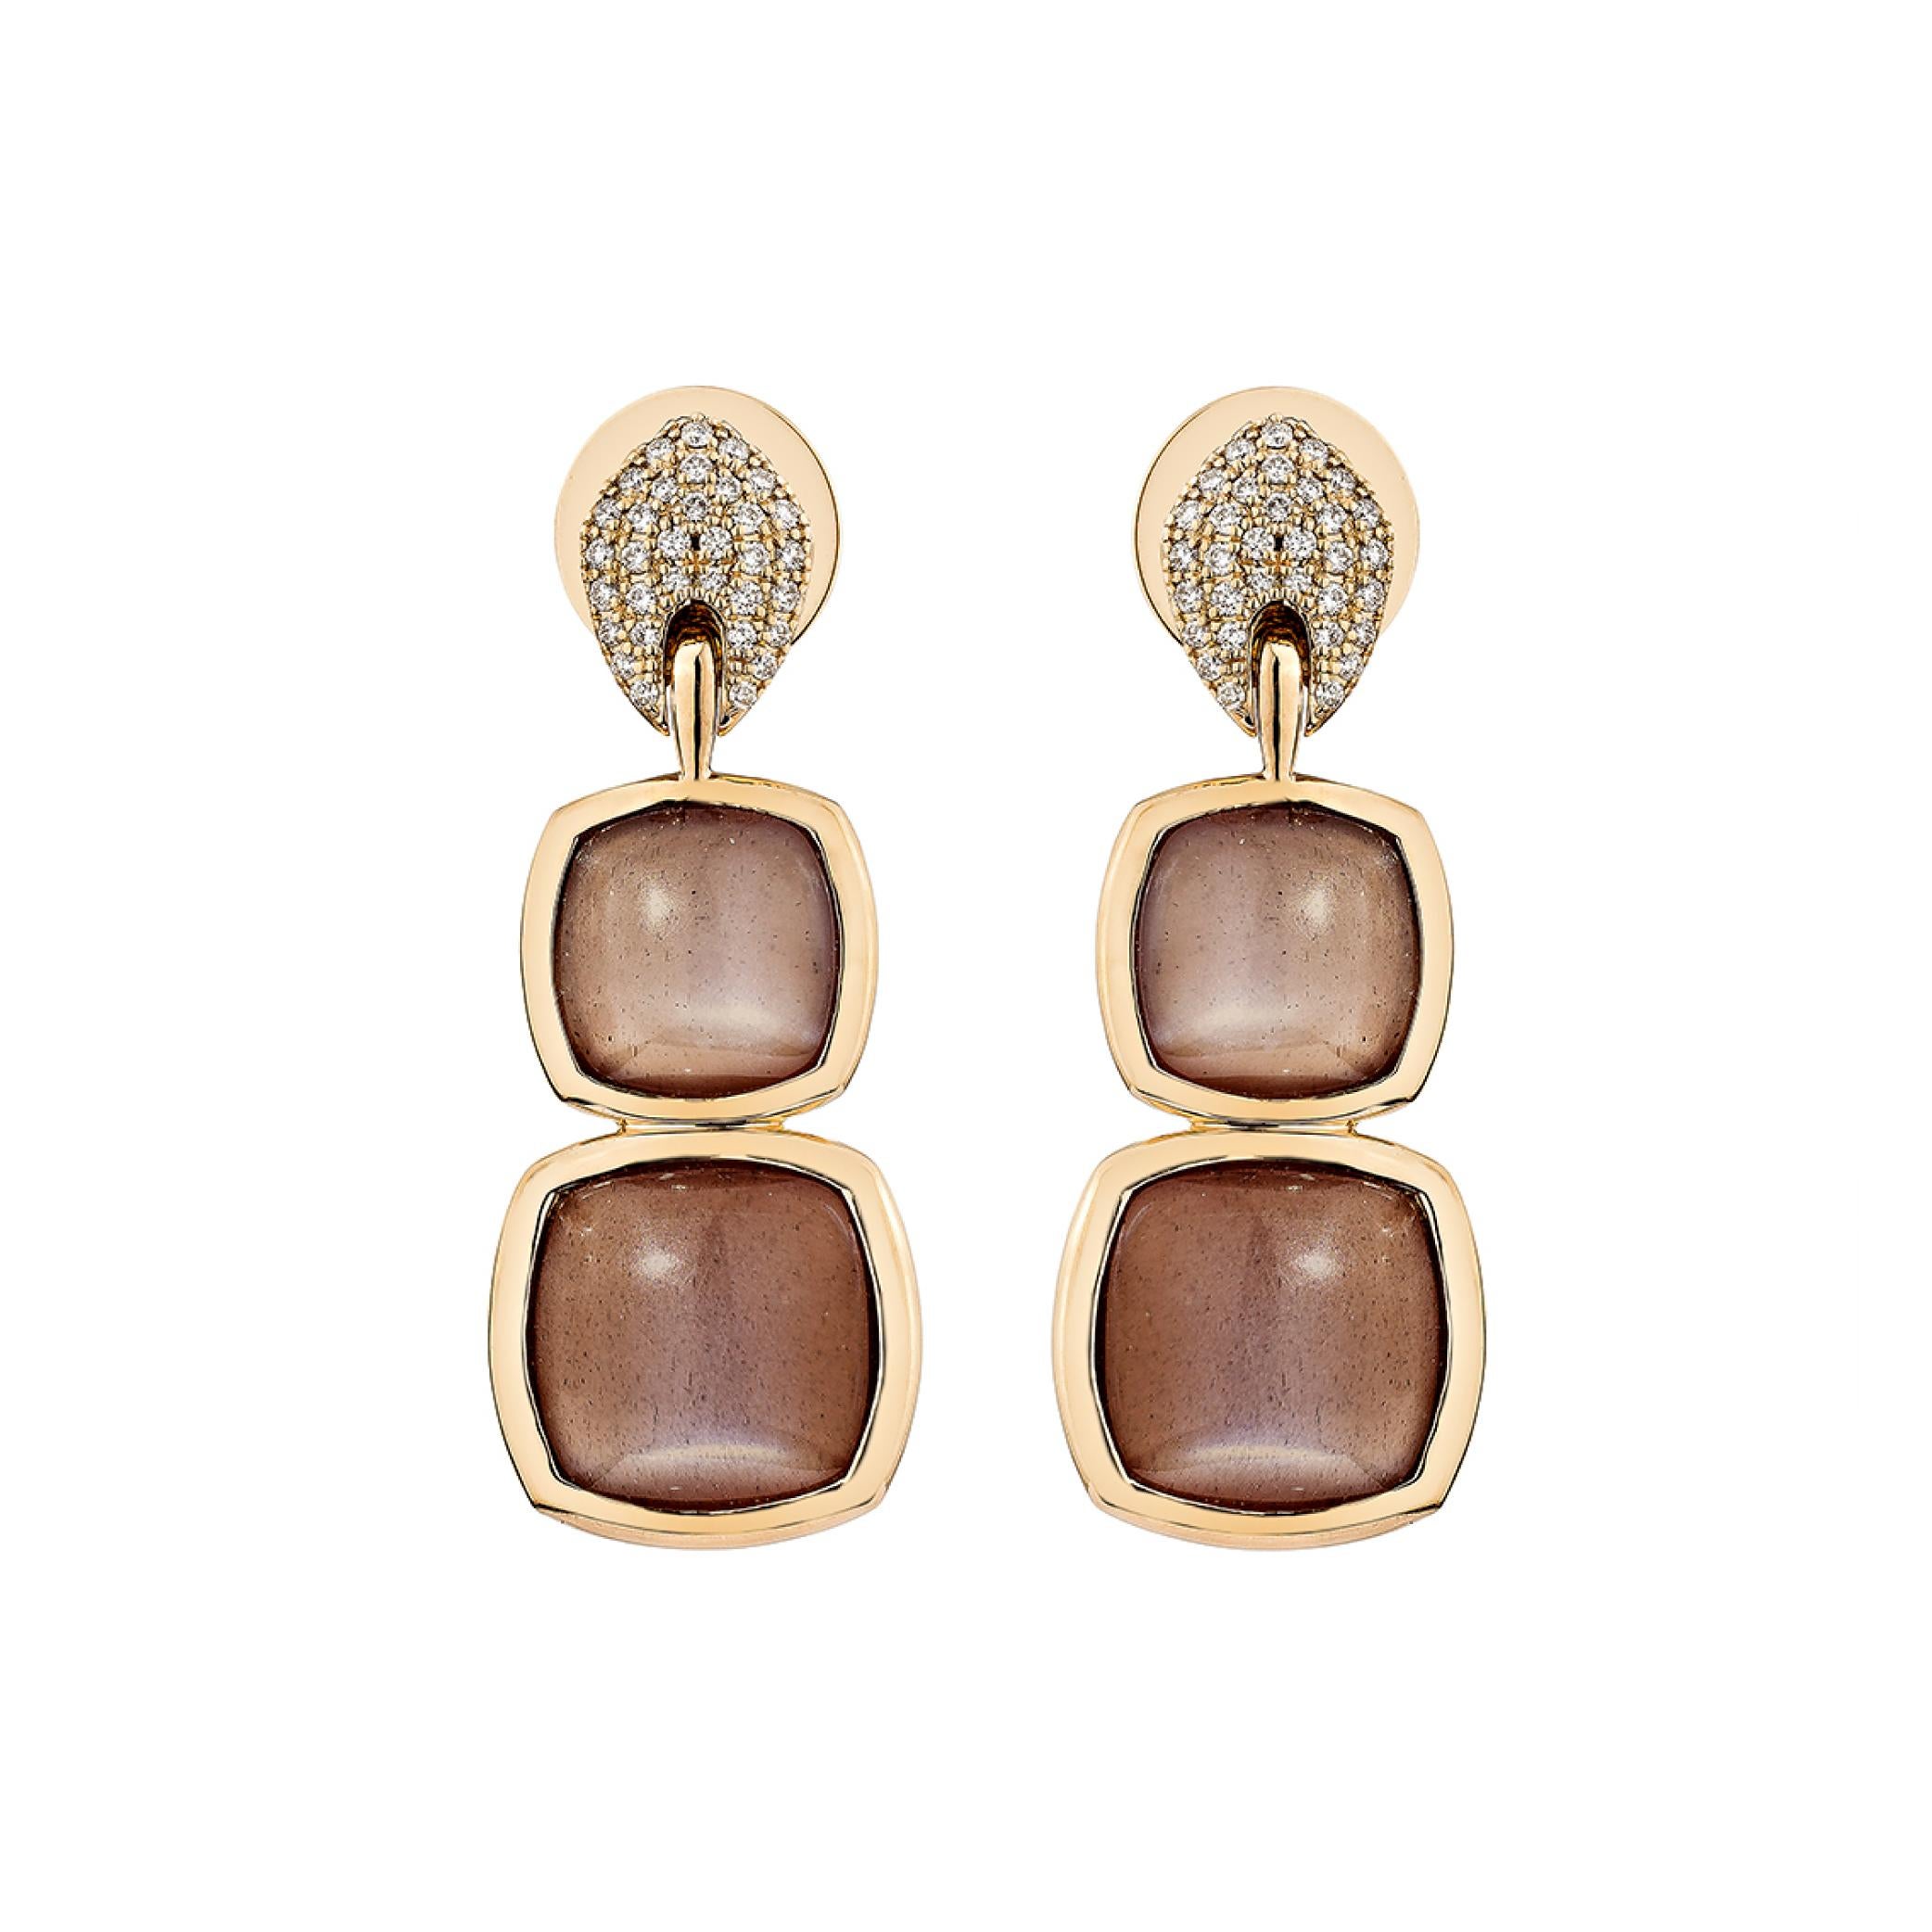 Contemporary 20.086 Carat Chocolate Moonstone Drop Earring in 18KRG With White Diamond. For Sale